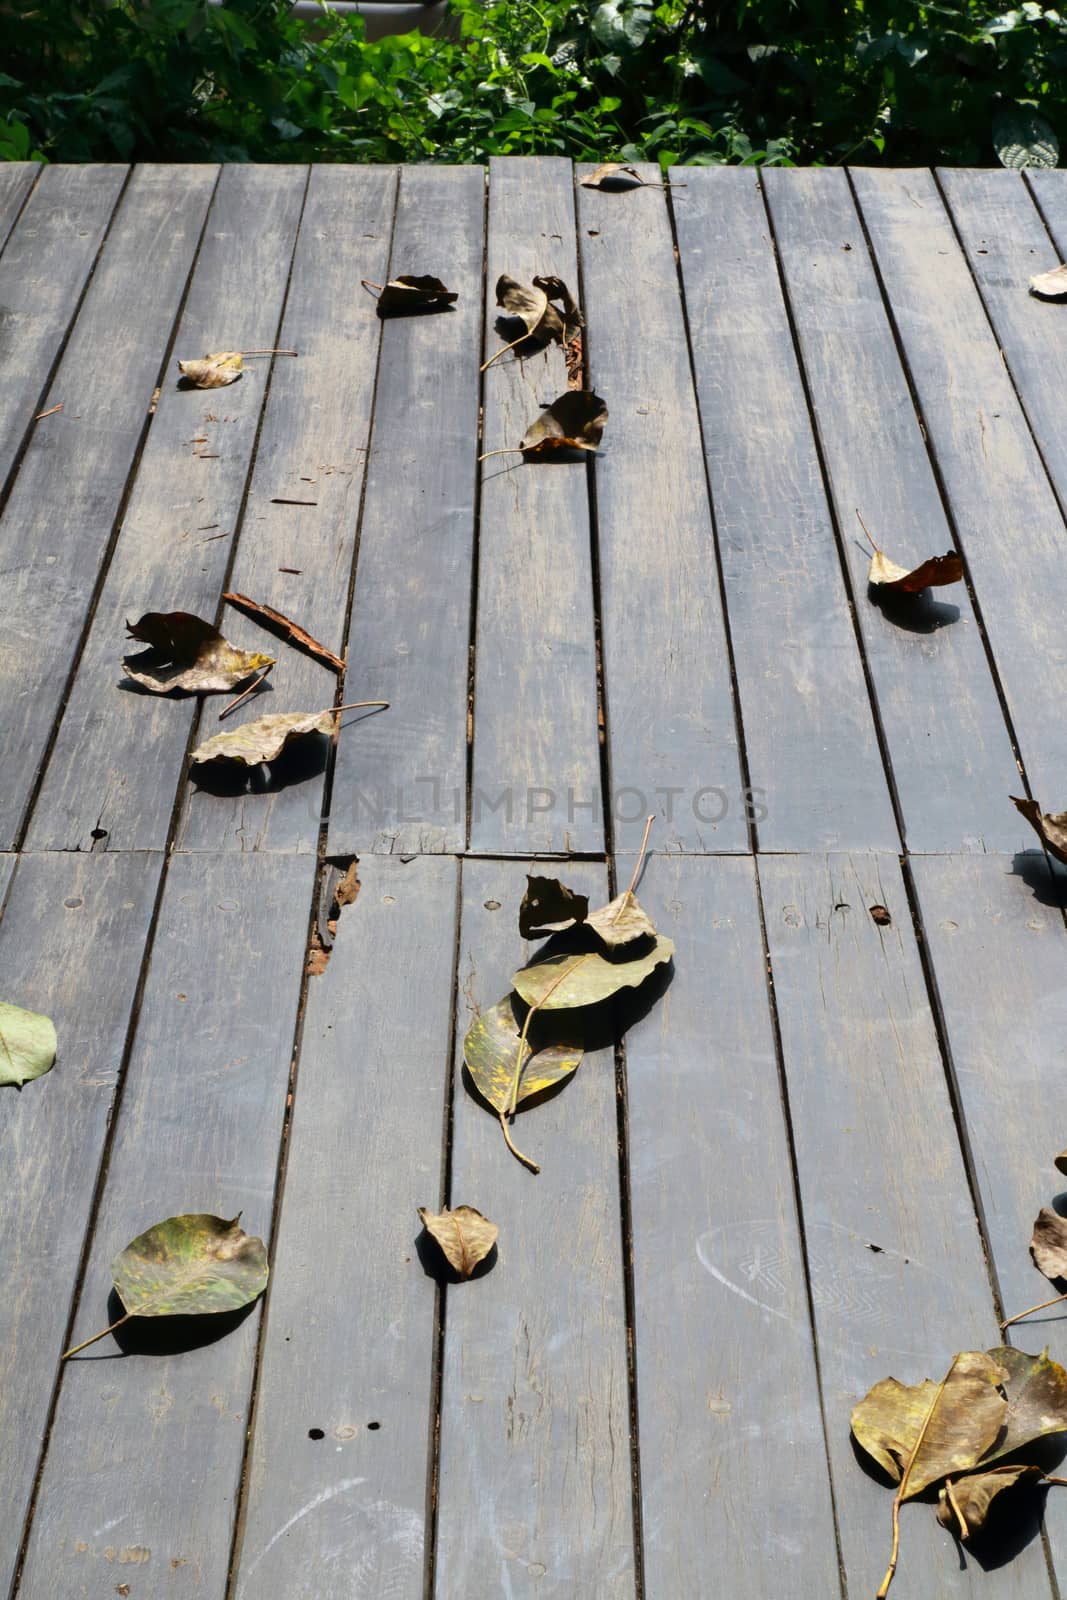 Many dry leaves fall on the wooden floor.